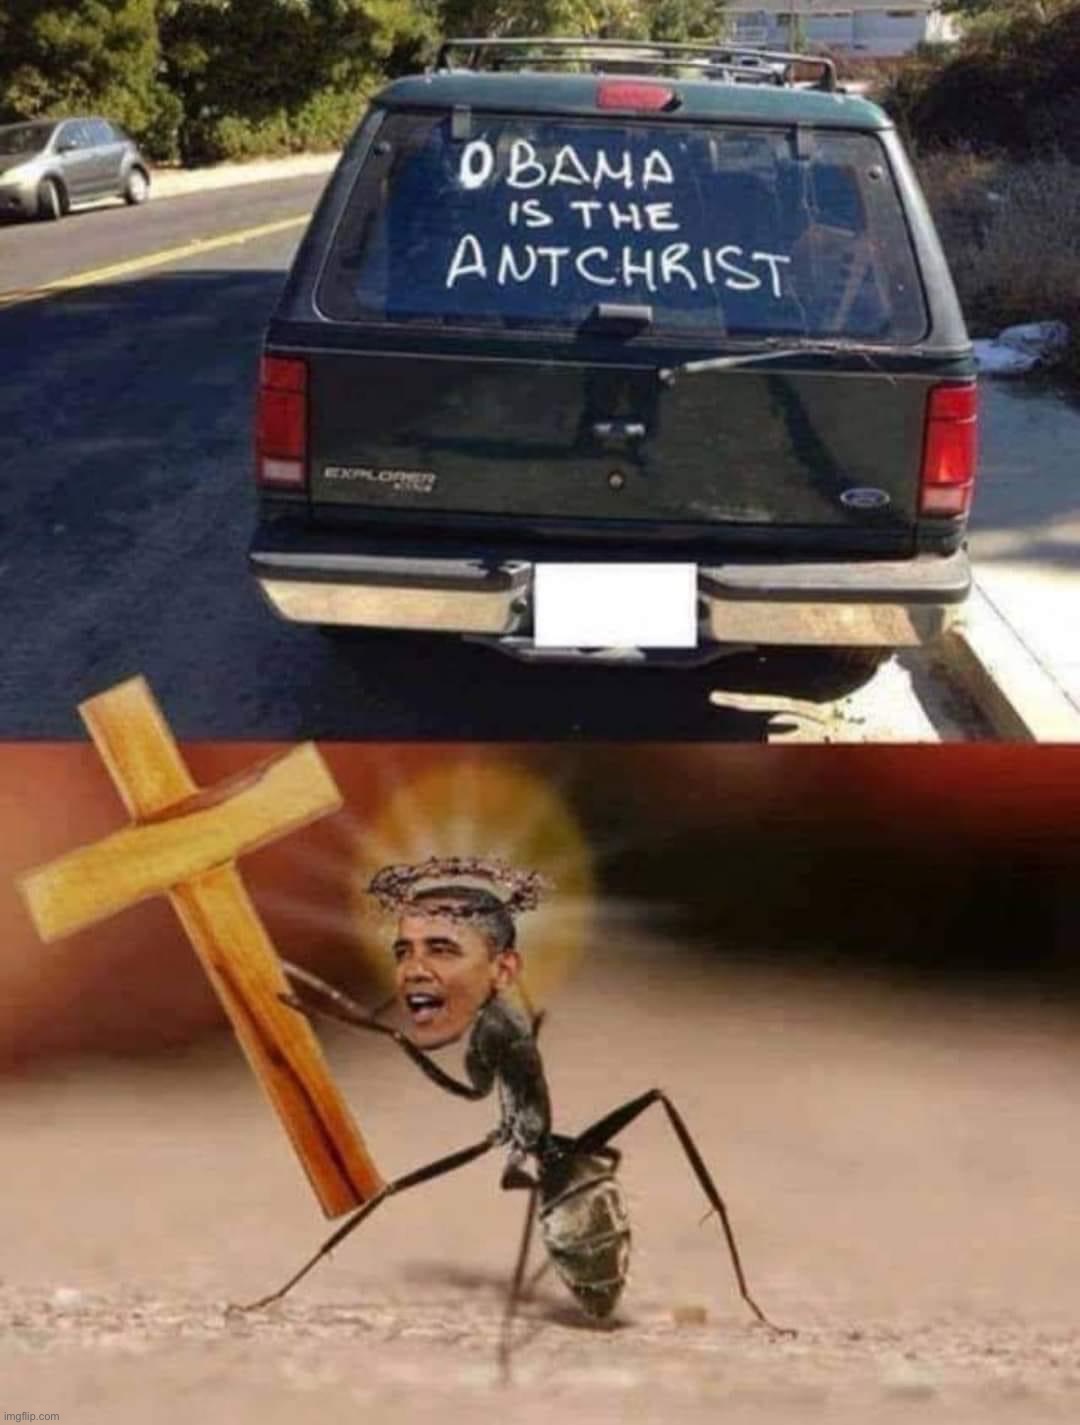 I did Nazi that coming | image tagged in obama is the antchrist | made w/ Imgflip meme maker